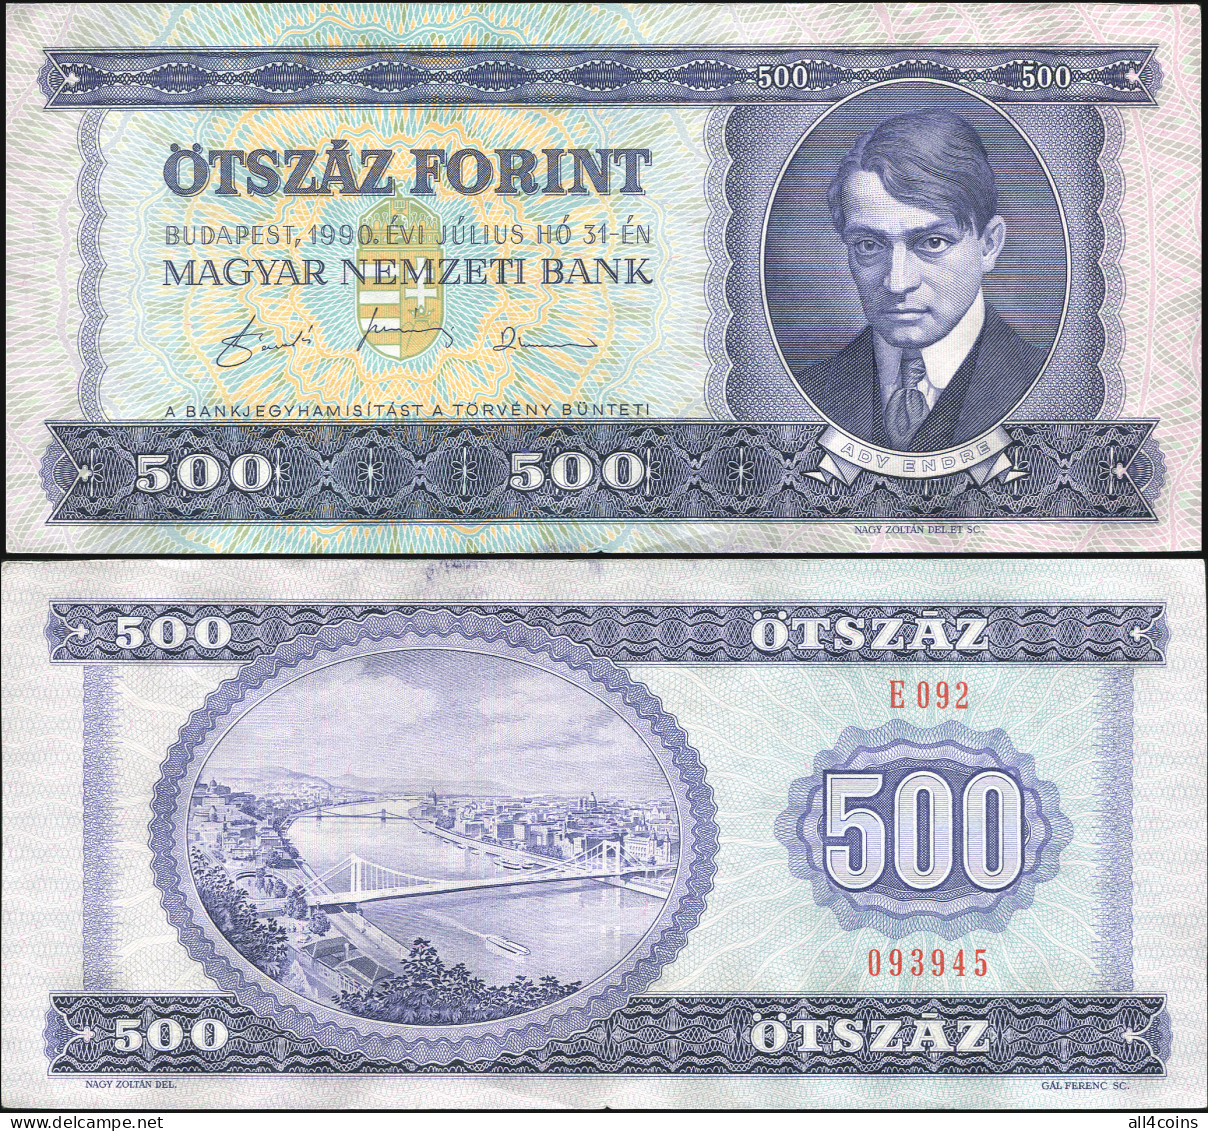 Hungary 500 Forint. 31.07.1990 Paper AUnc. Banknote Cat# P.175a - Hungary